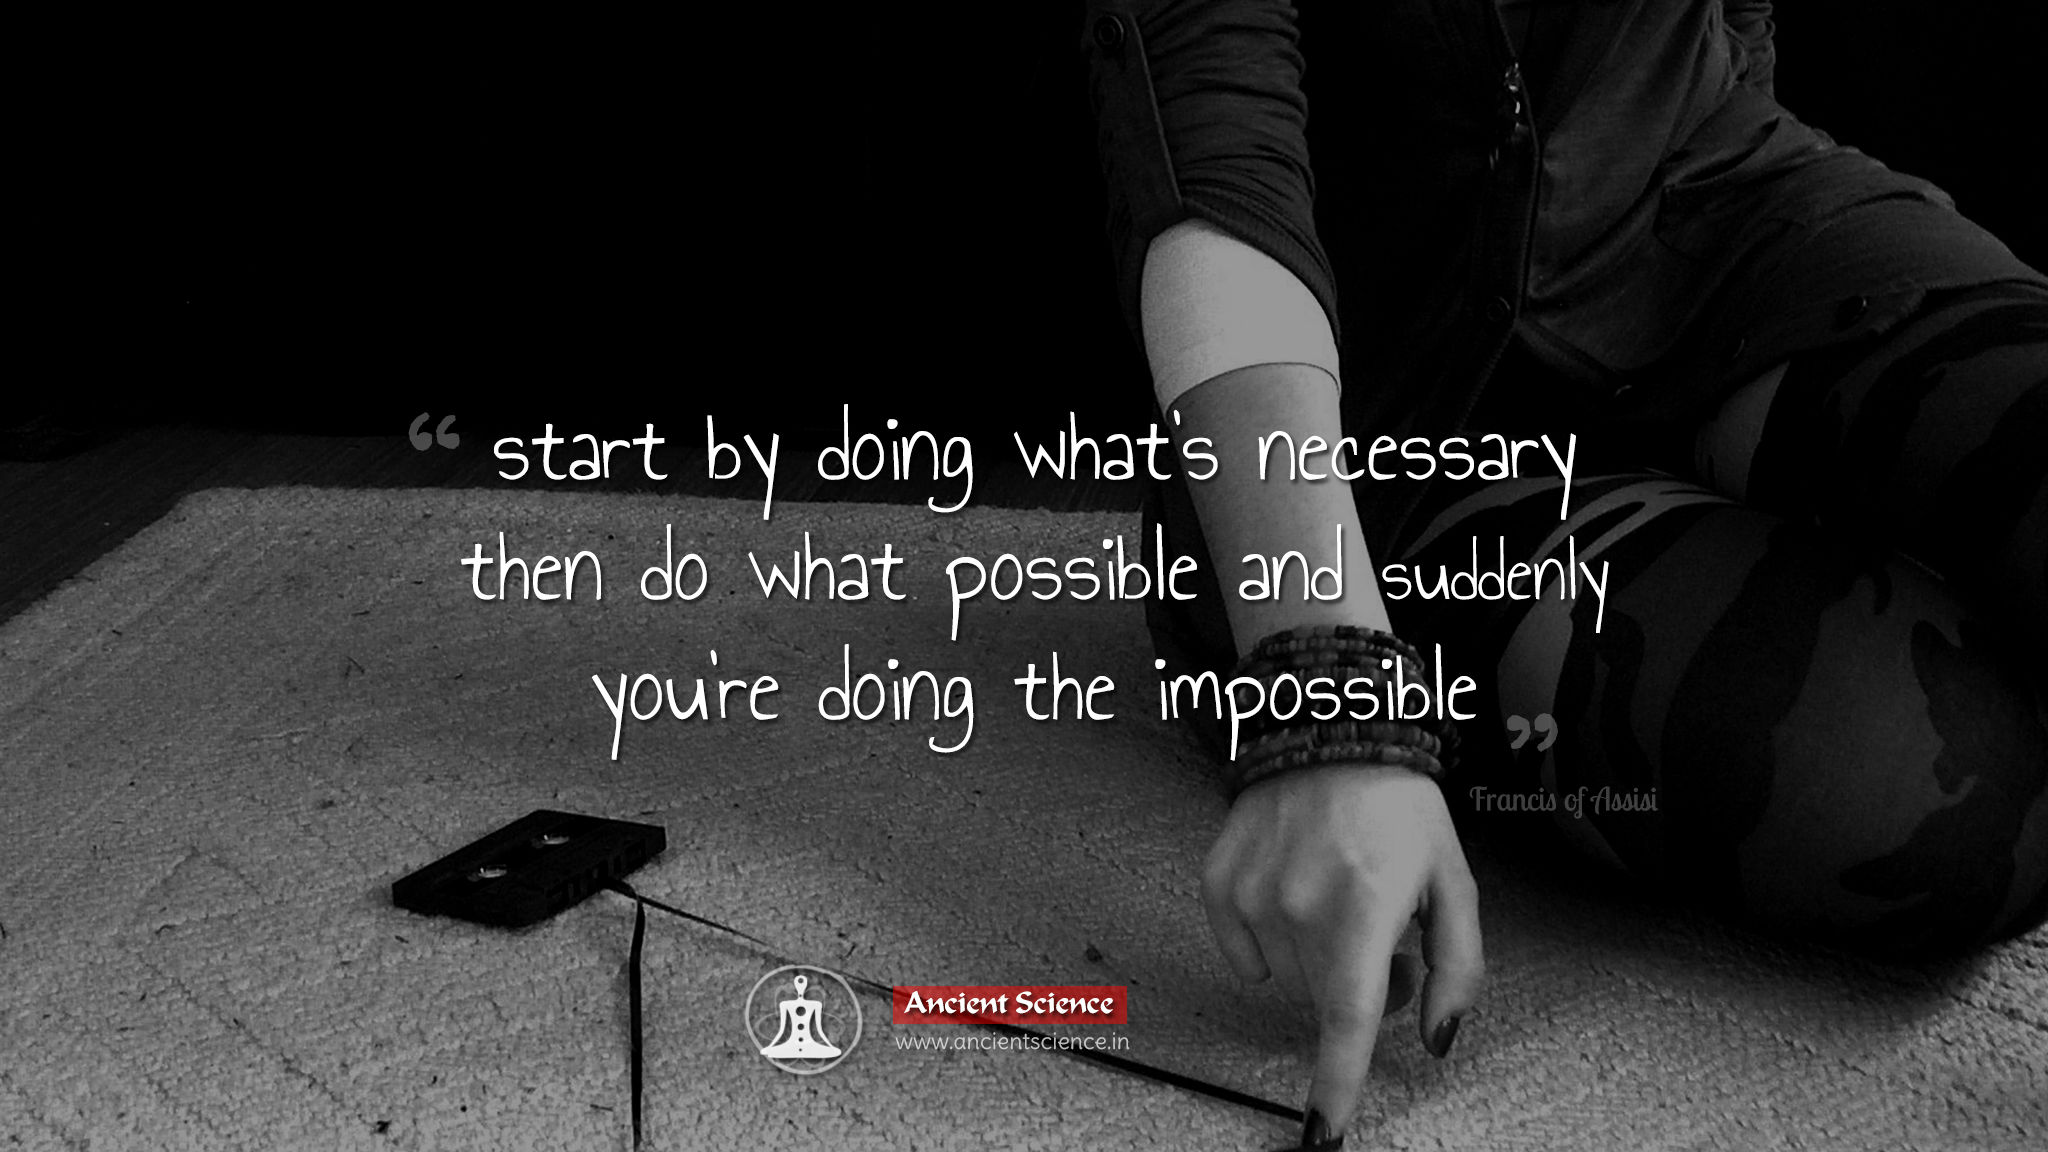 start by doing what's necessary then do what possible and suddenly you're doing the impossible